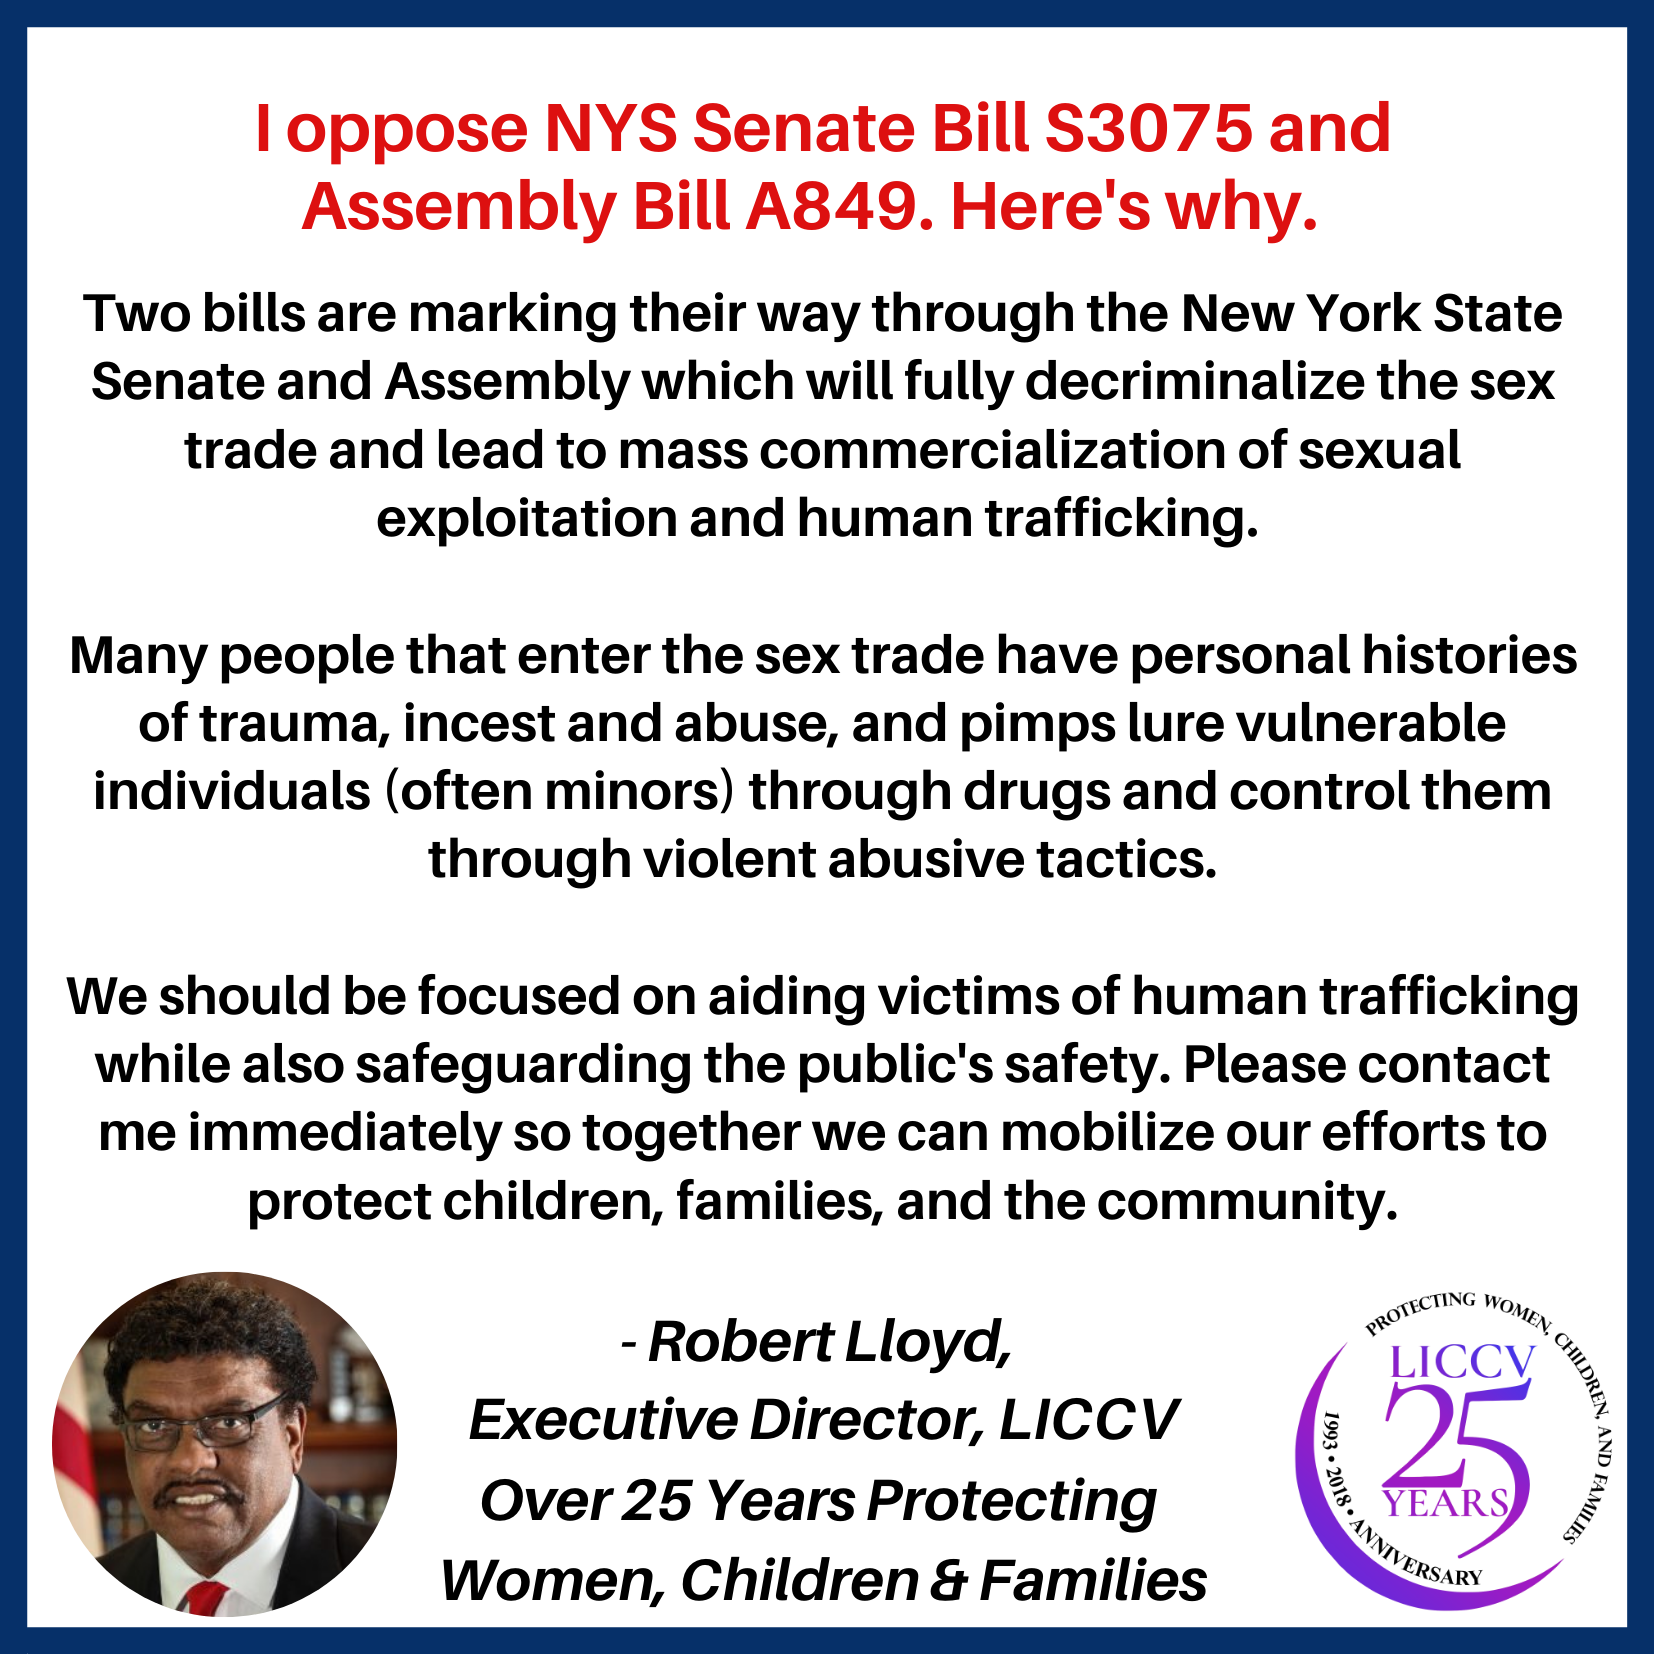 Executive Director Bobby Lloyd Opposes NYS Senate Bill S3075 And Assembly Bill A849. Here’s Why.